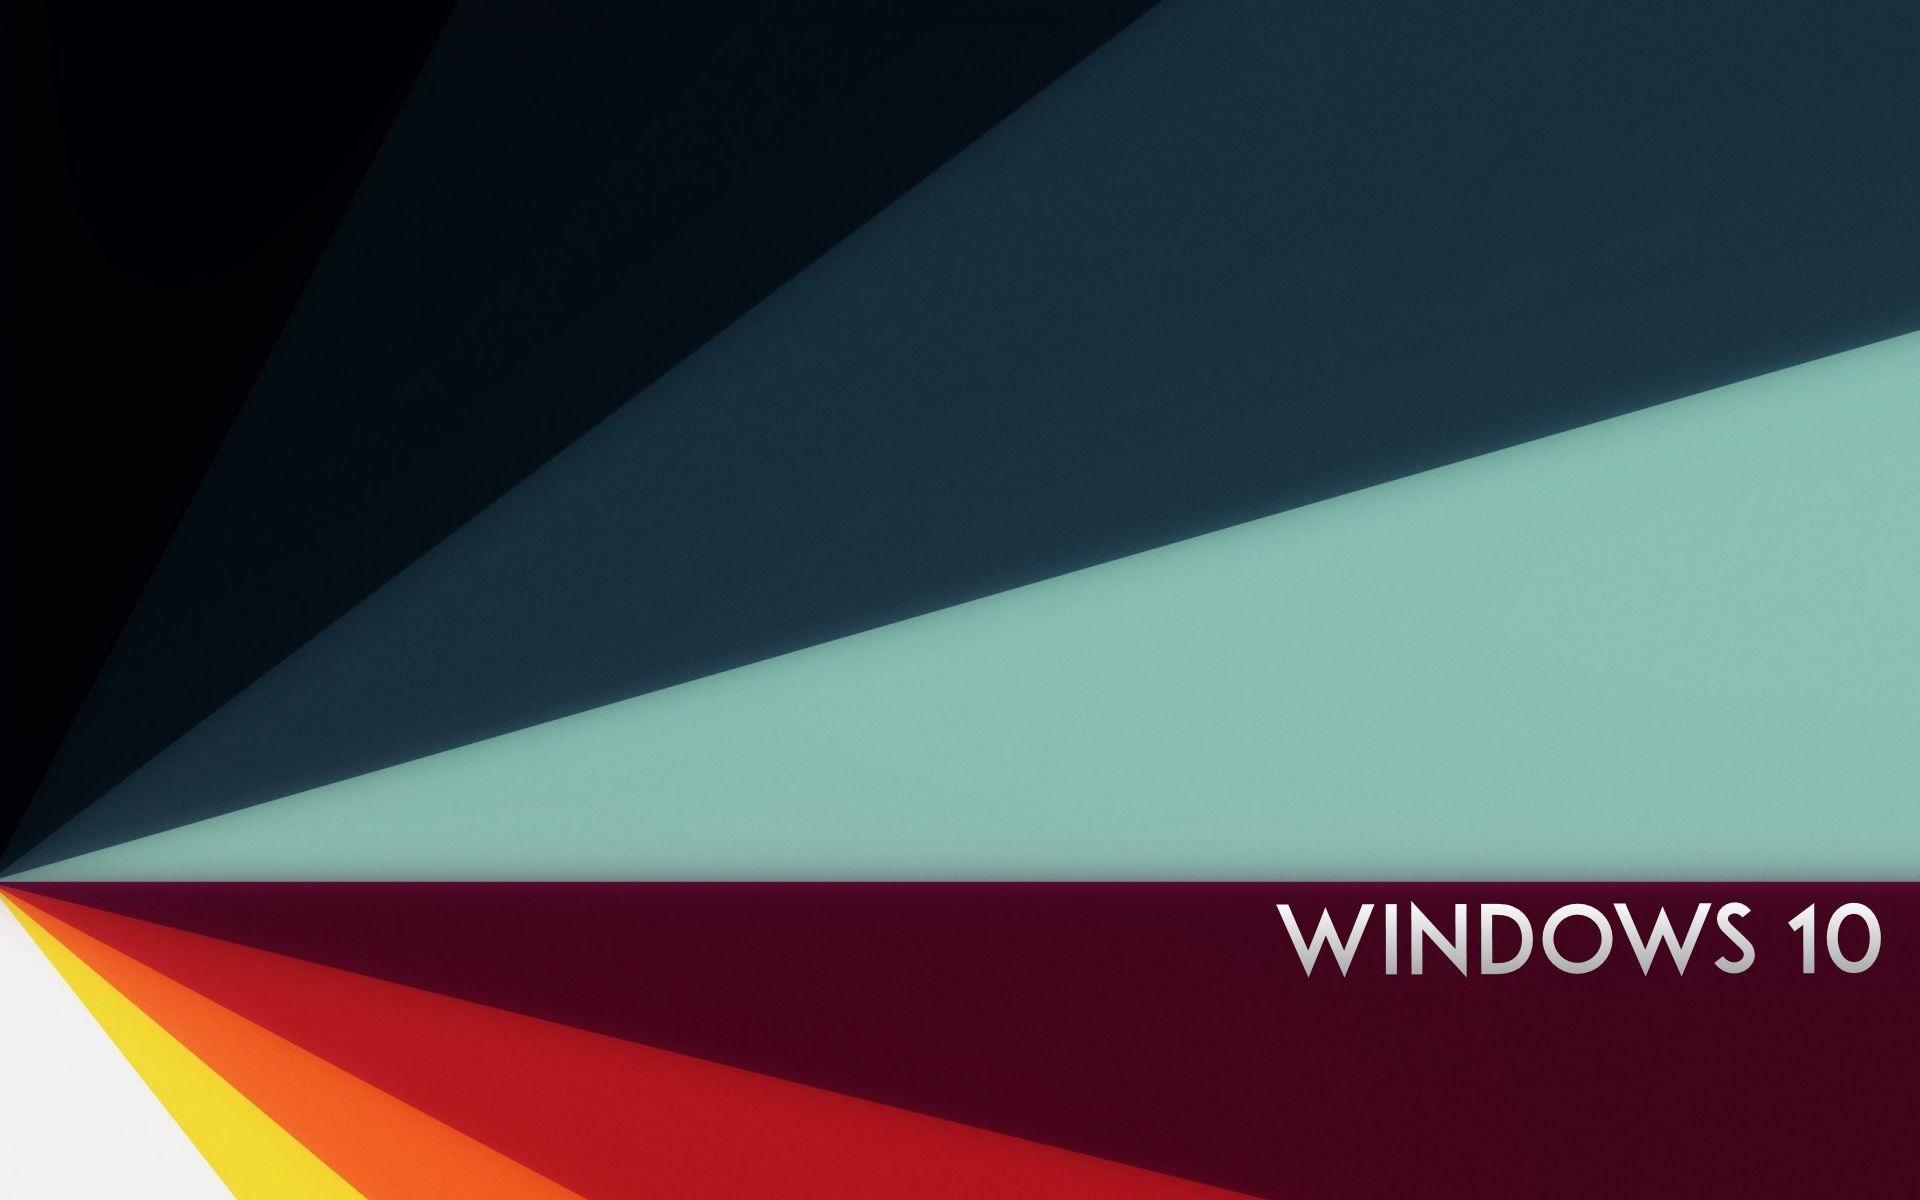 Download Wallpaper For 1366x768 Resolution Windows 10 Abstract Background Brands And Logos Wallpaper Better